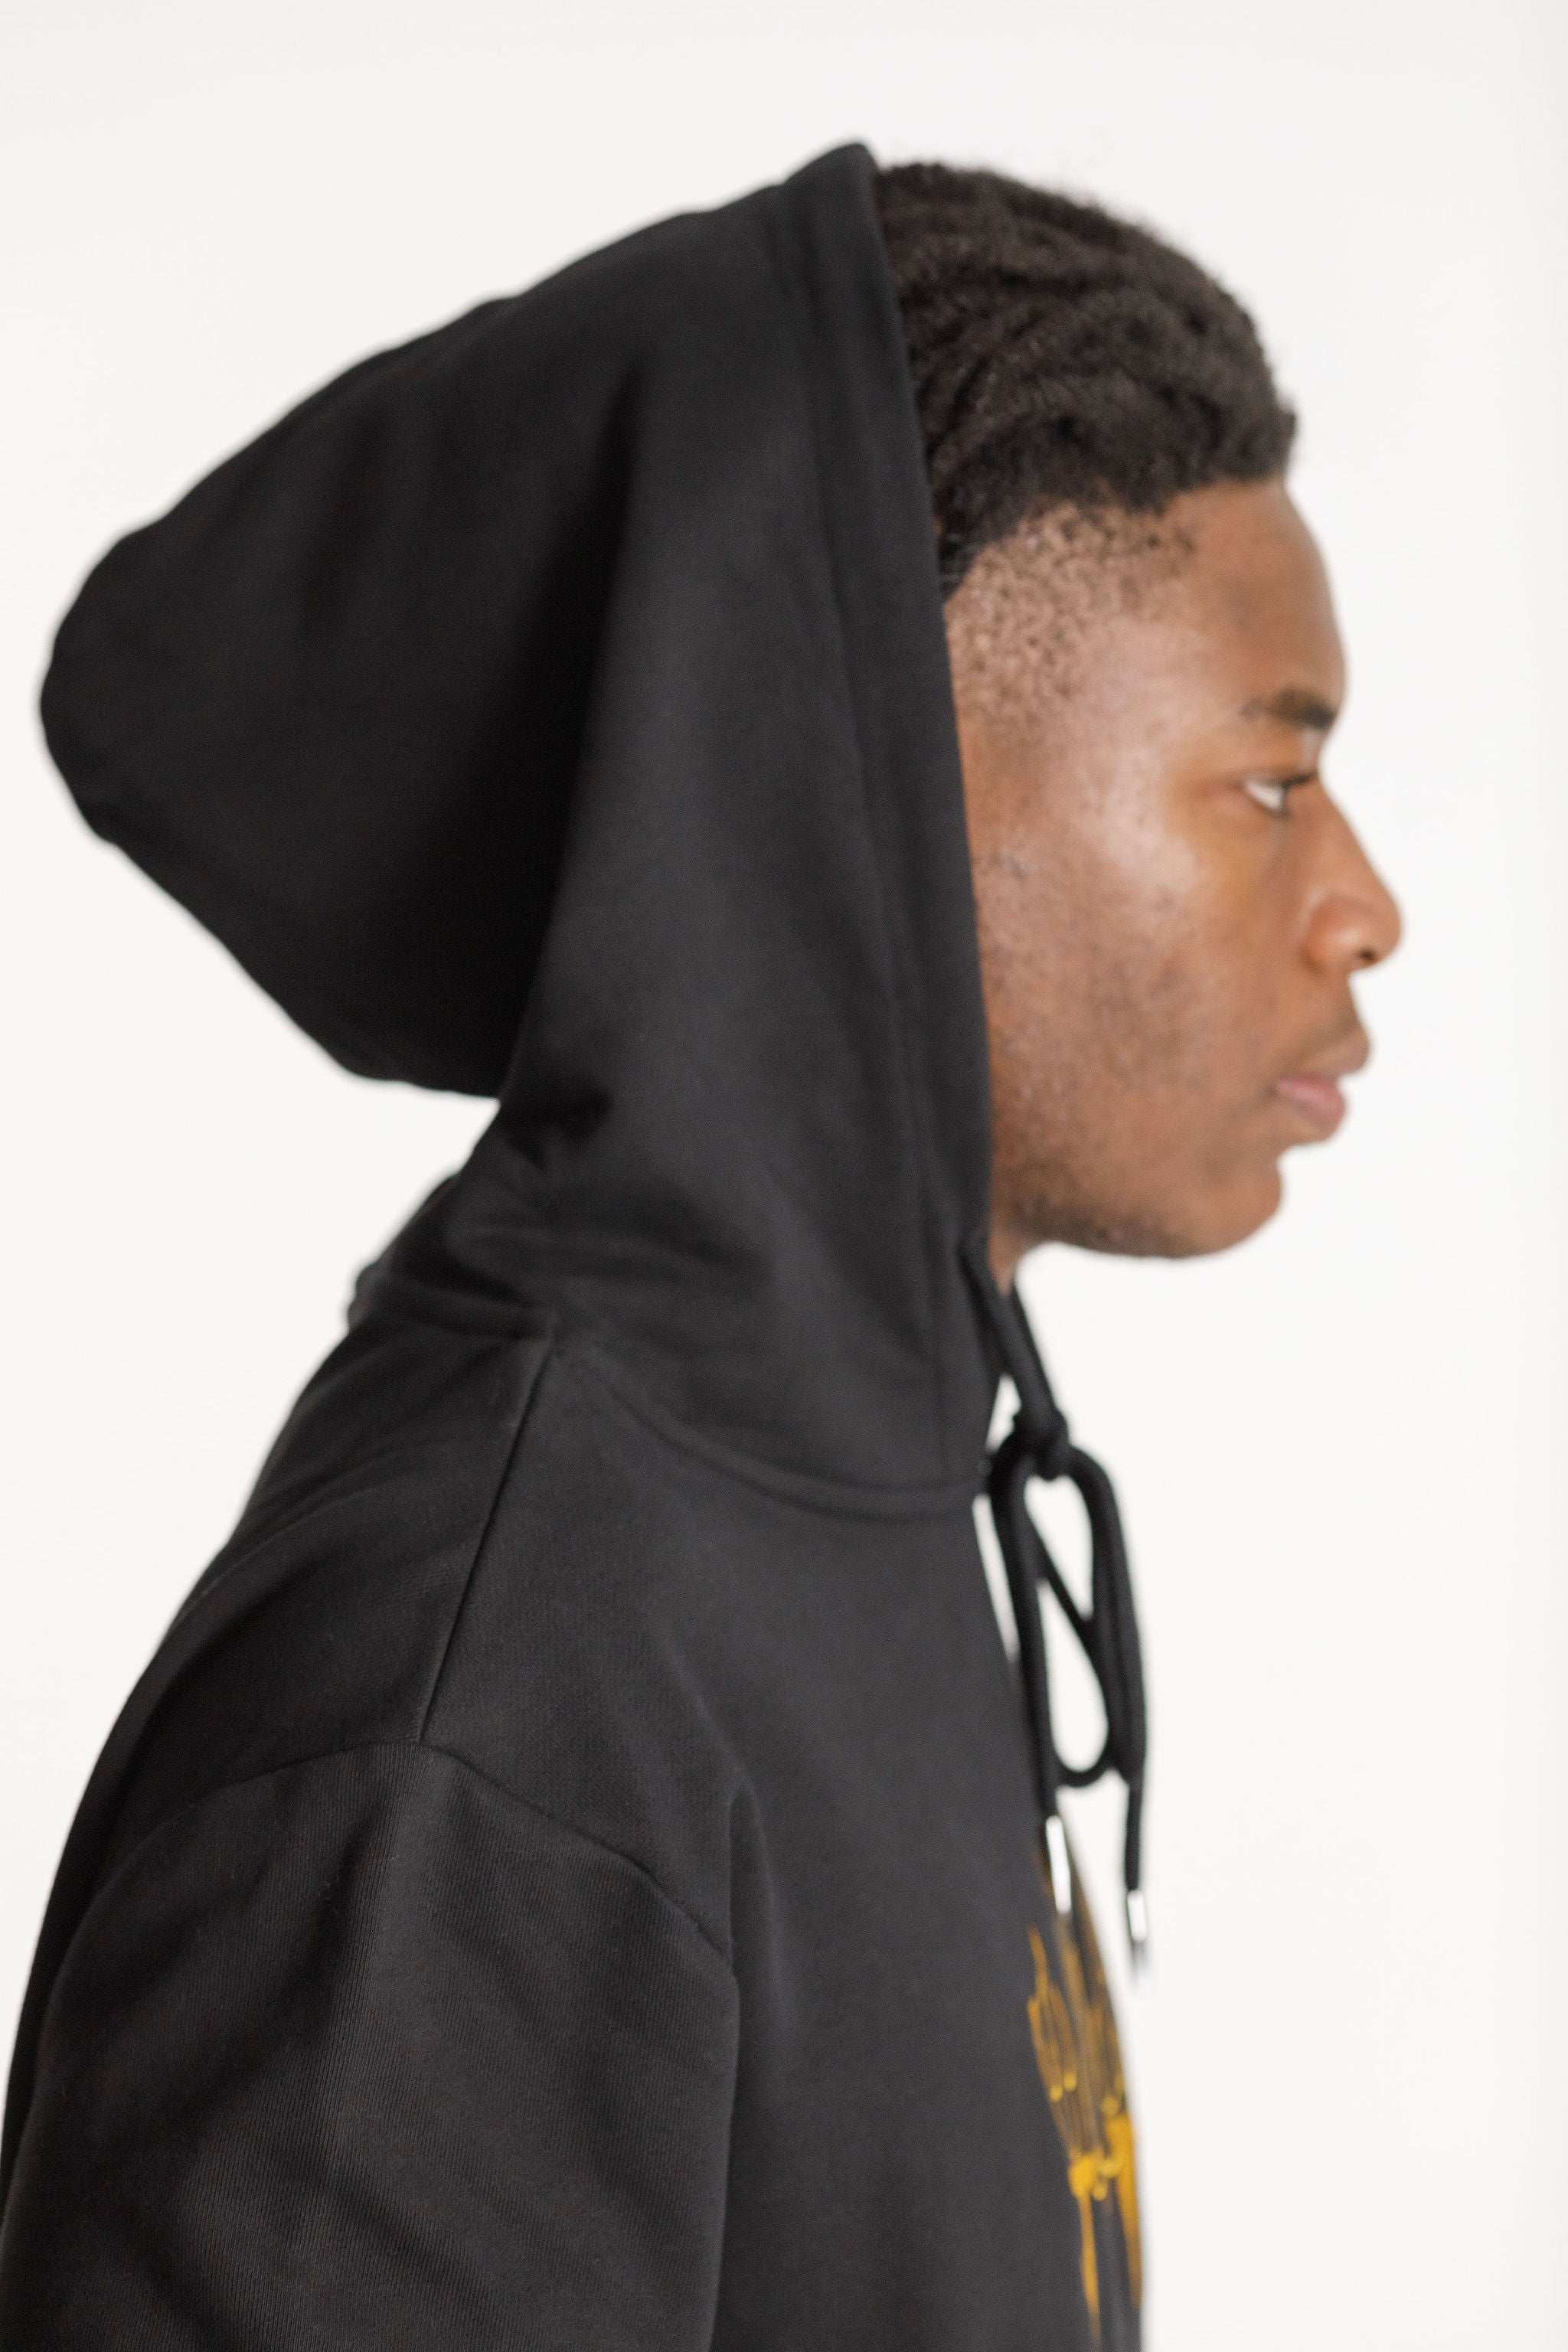 Title Hood - Sale - Black with Pyro Embroidery